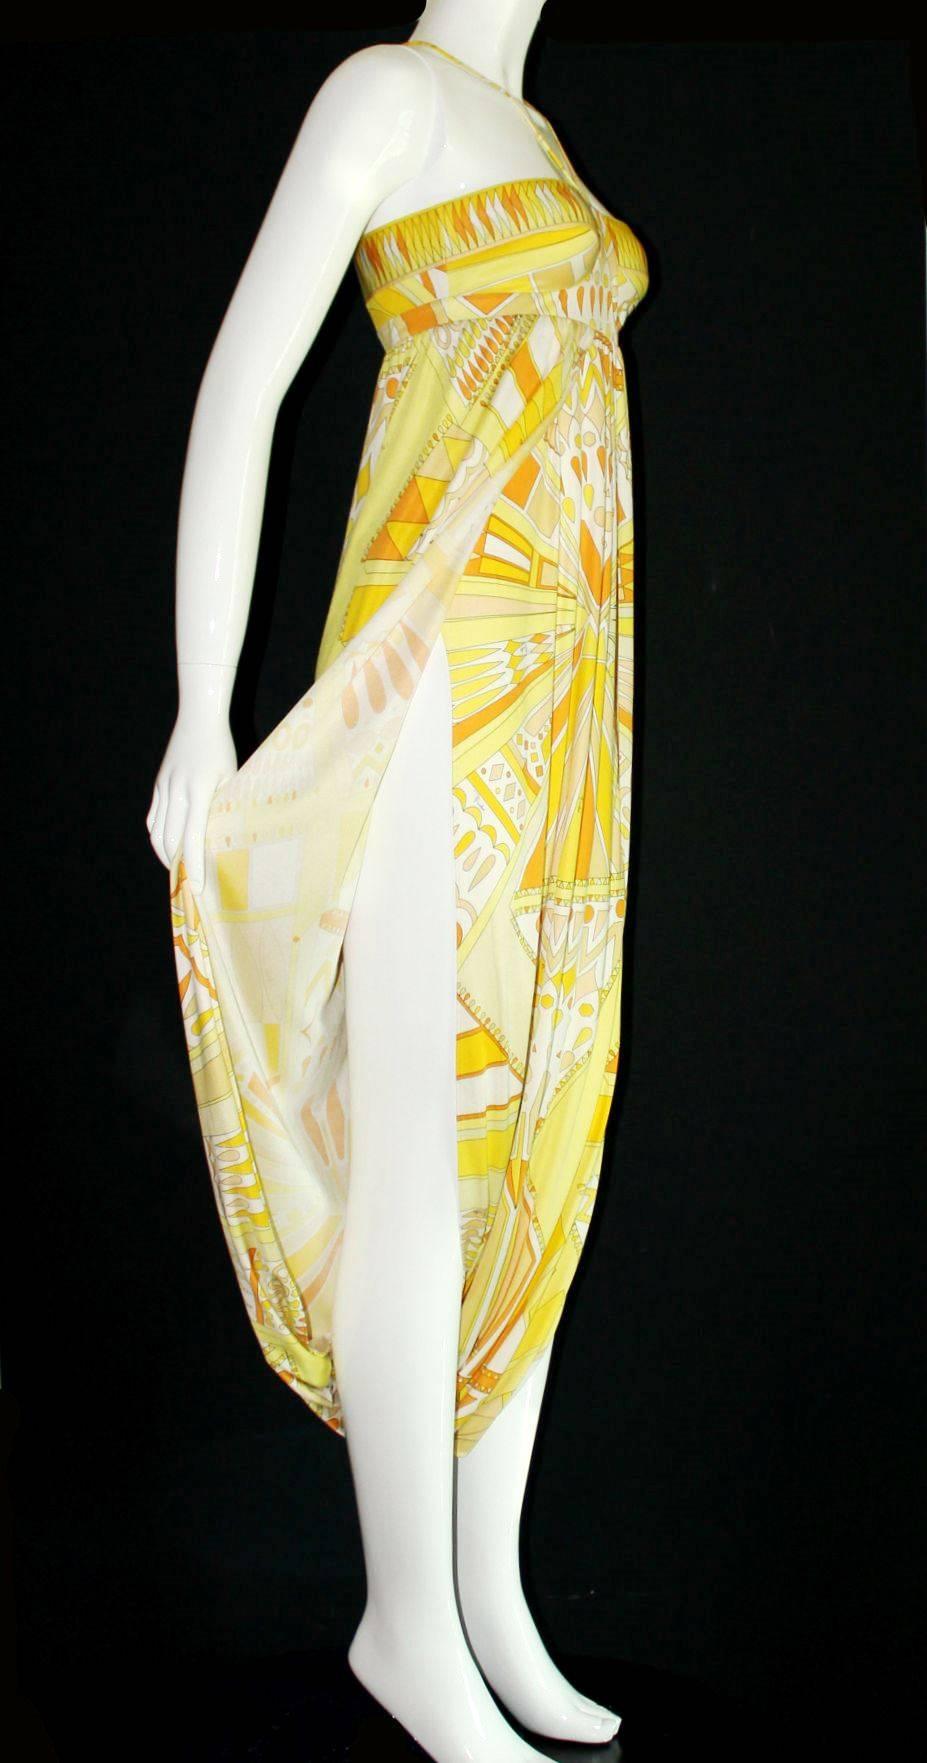 Exclusive and gorgeous EMILIO PUCCI goddess harem jumpsuit gown
Rare and special piece
Beautiful jersey silk 
Sexy high split on sides
Front and back panel connected - a perfect style mixture of gown and jumpsuit
Emilio Pucci signature print
